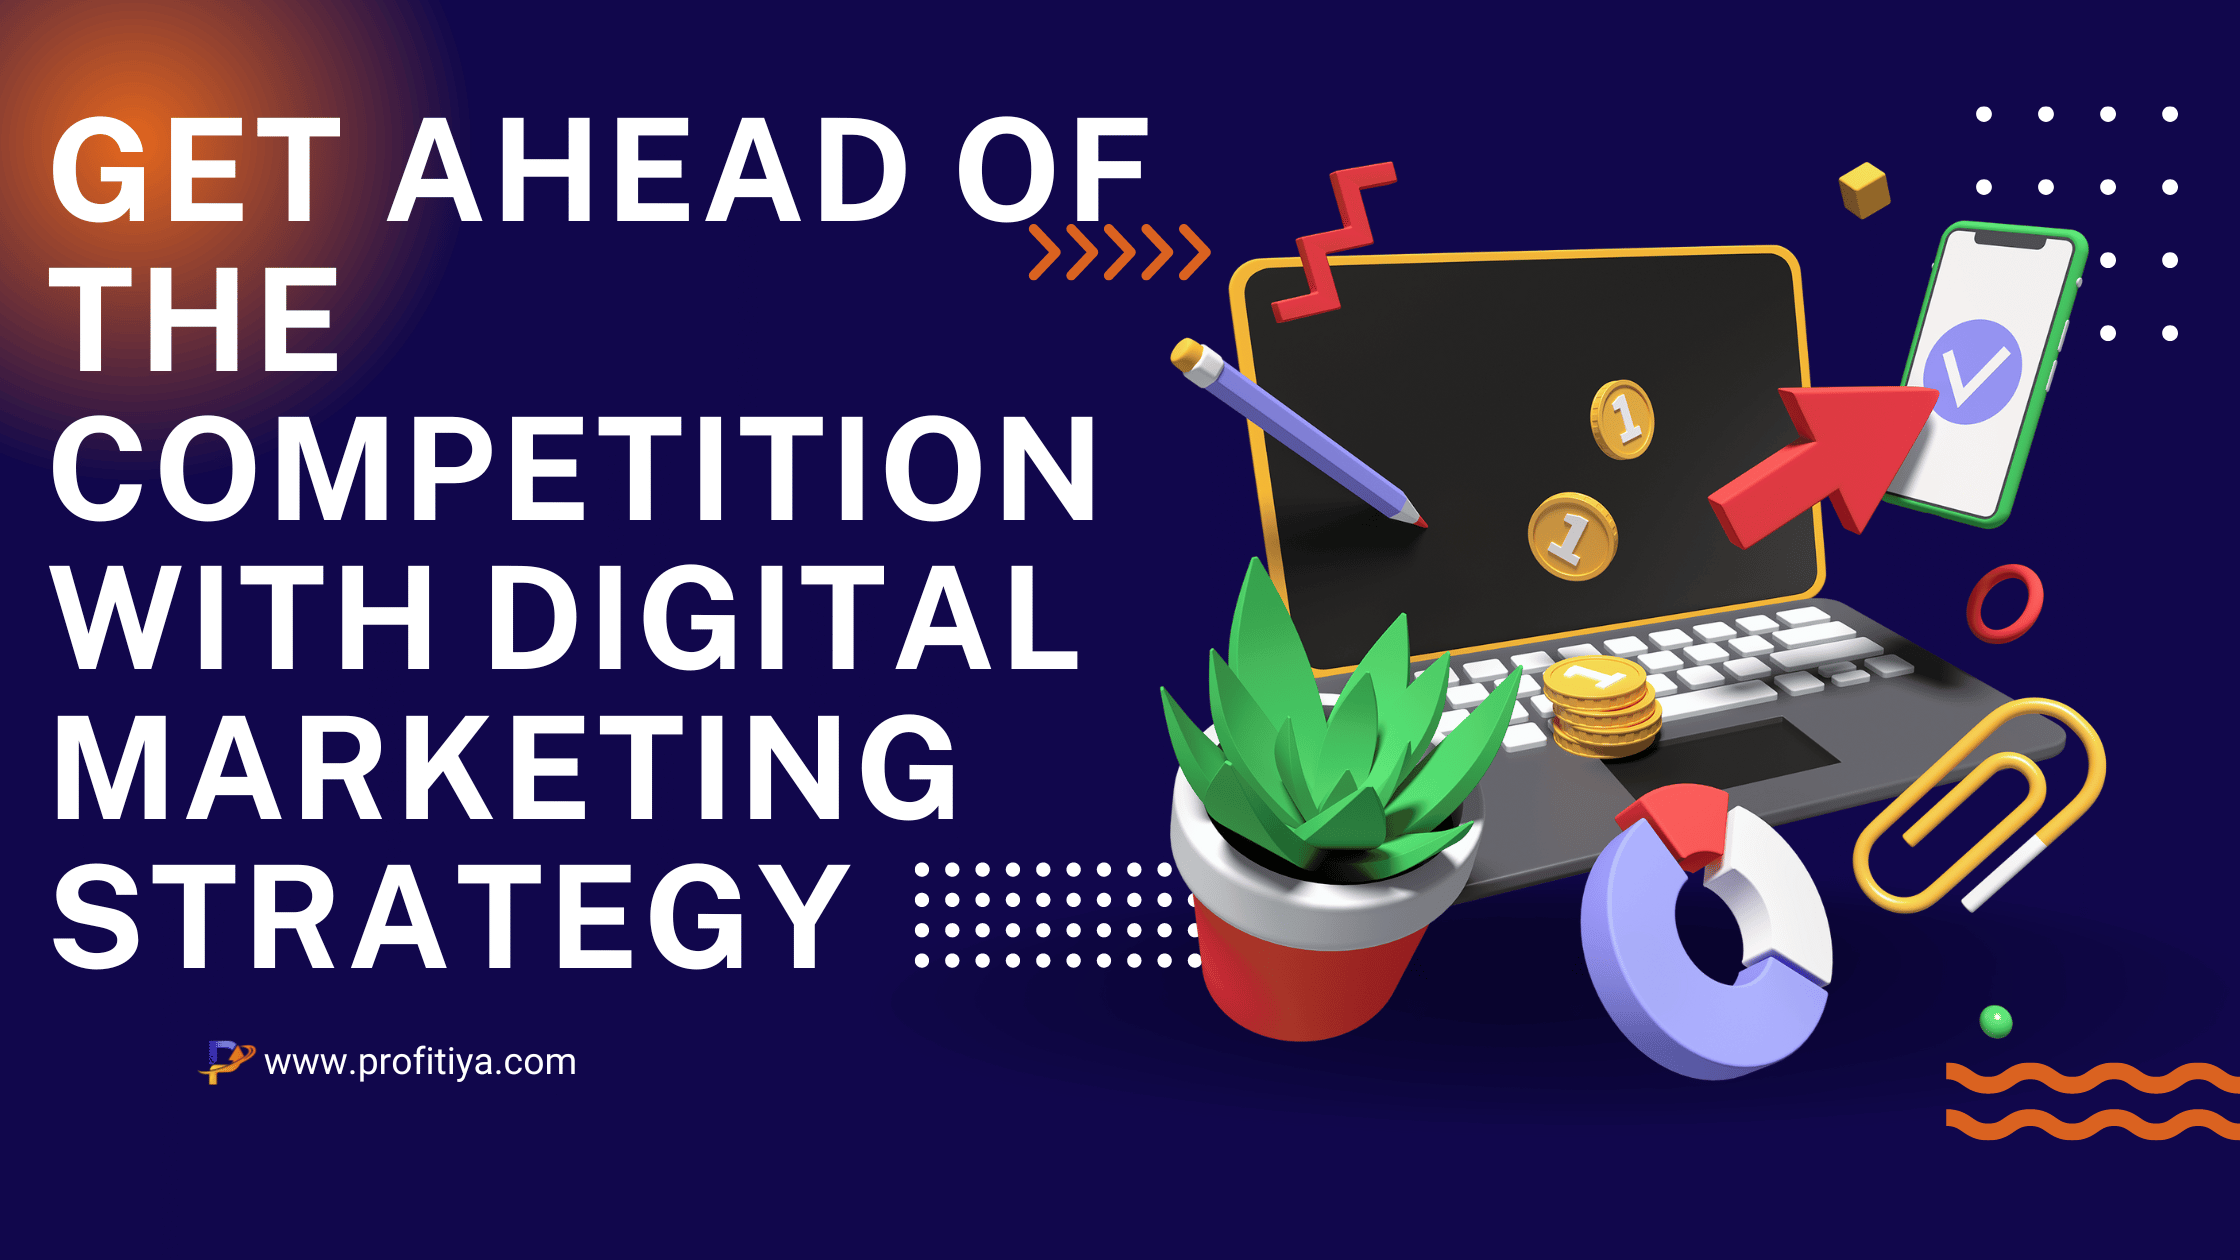 Get Ahead Of The Competition With Digital Marketing Strategy